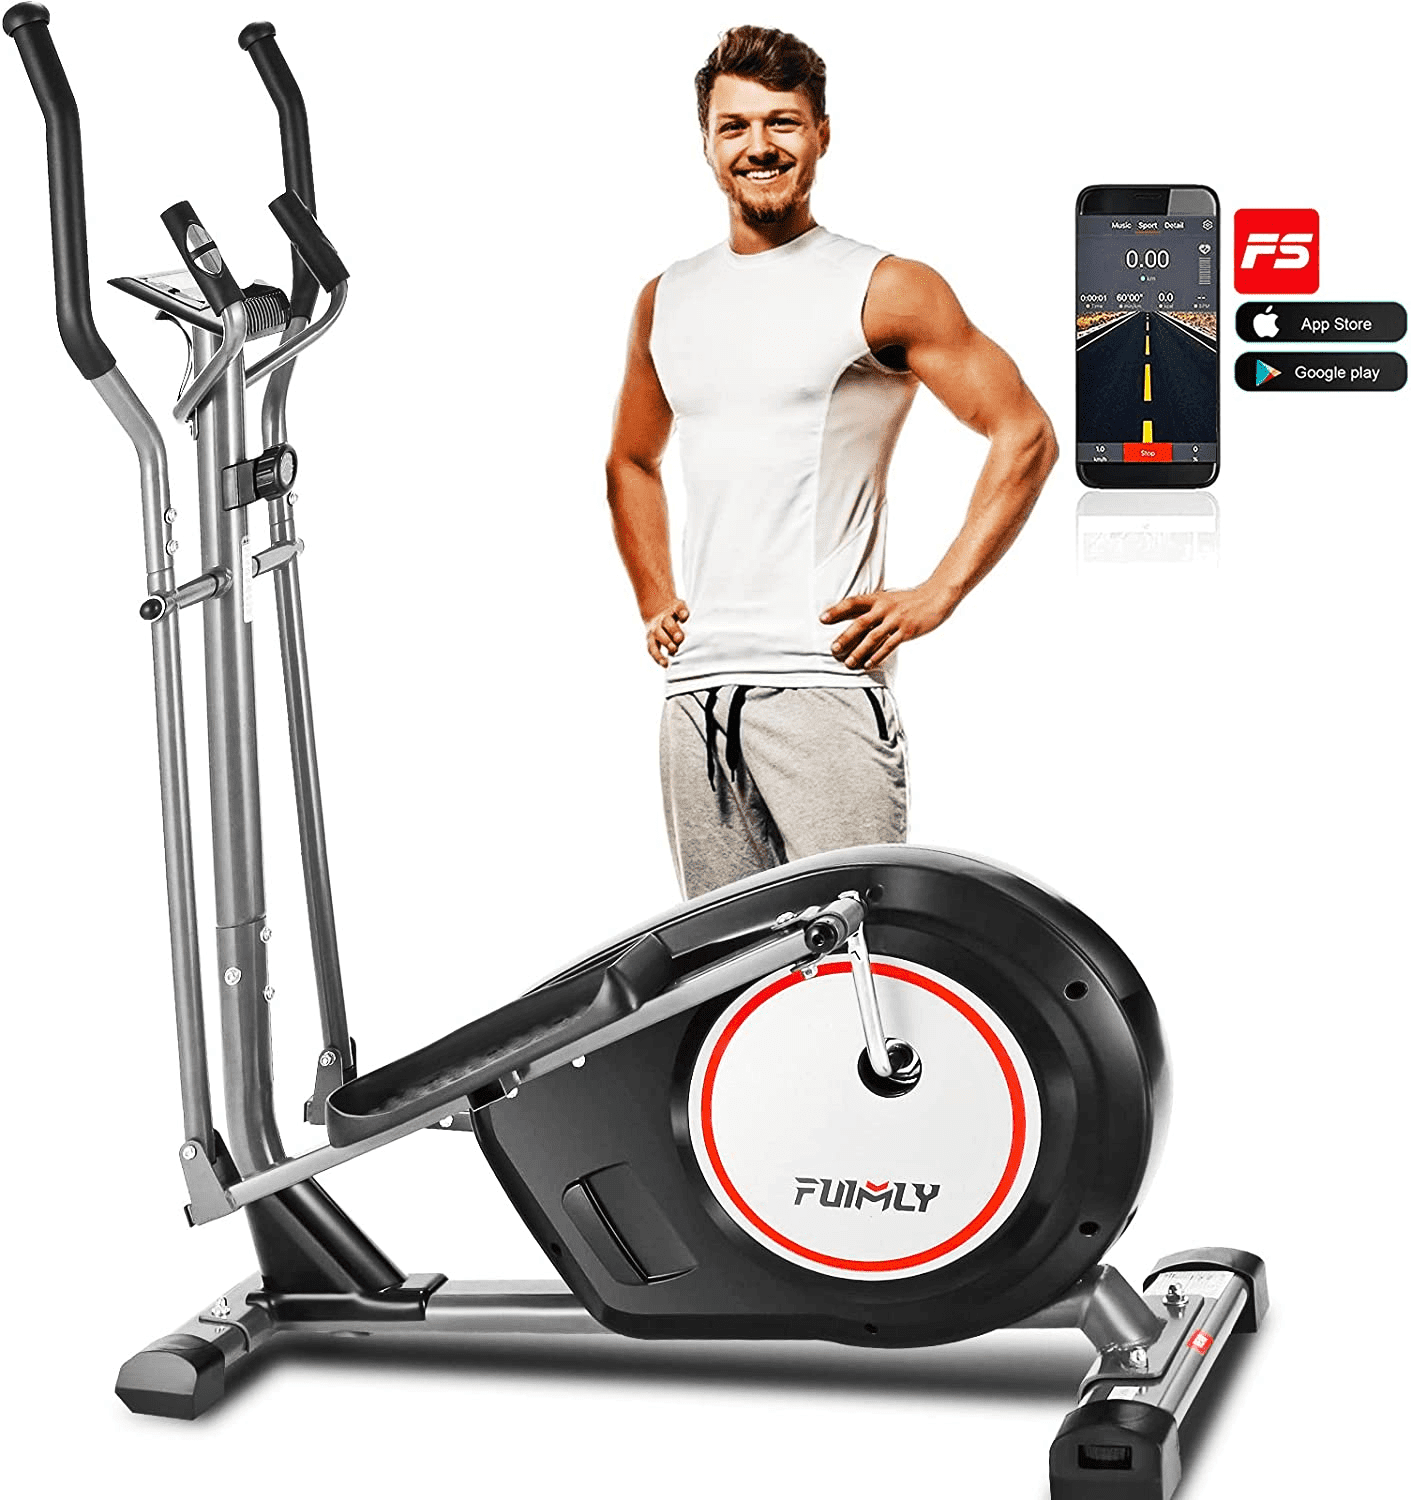 2022 APP Newest Elliptical Machine with Adjustable 10 Level Magnetic Resistance for Indoor Fitness Gym Workout Max Weight Capacity 390Lbs ANCHEER Elliptical Machine for Home Use 